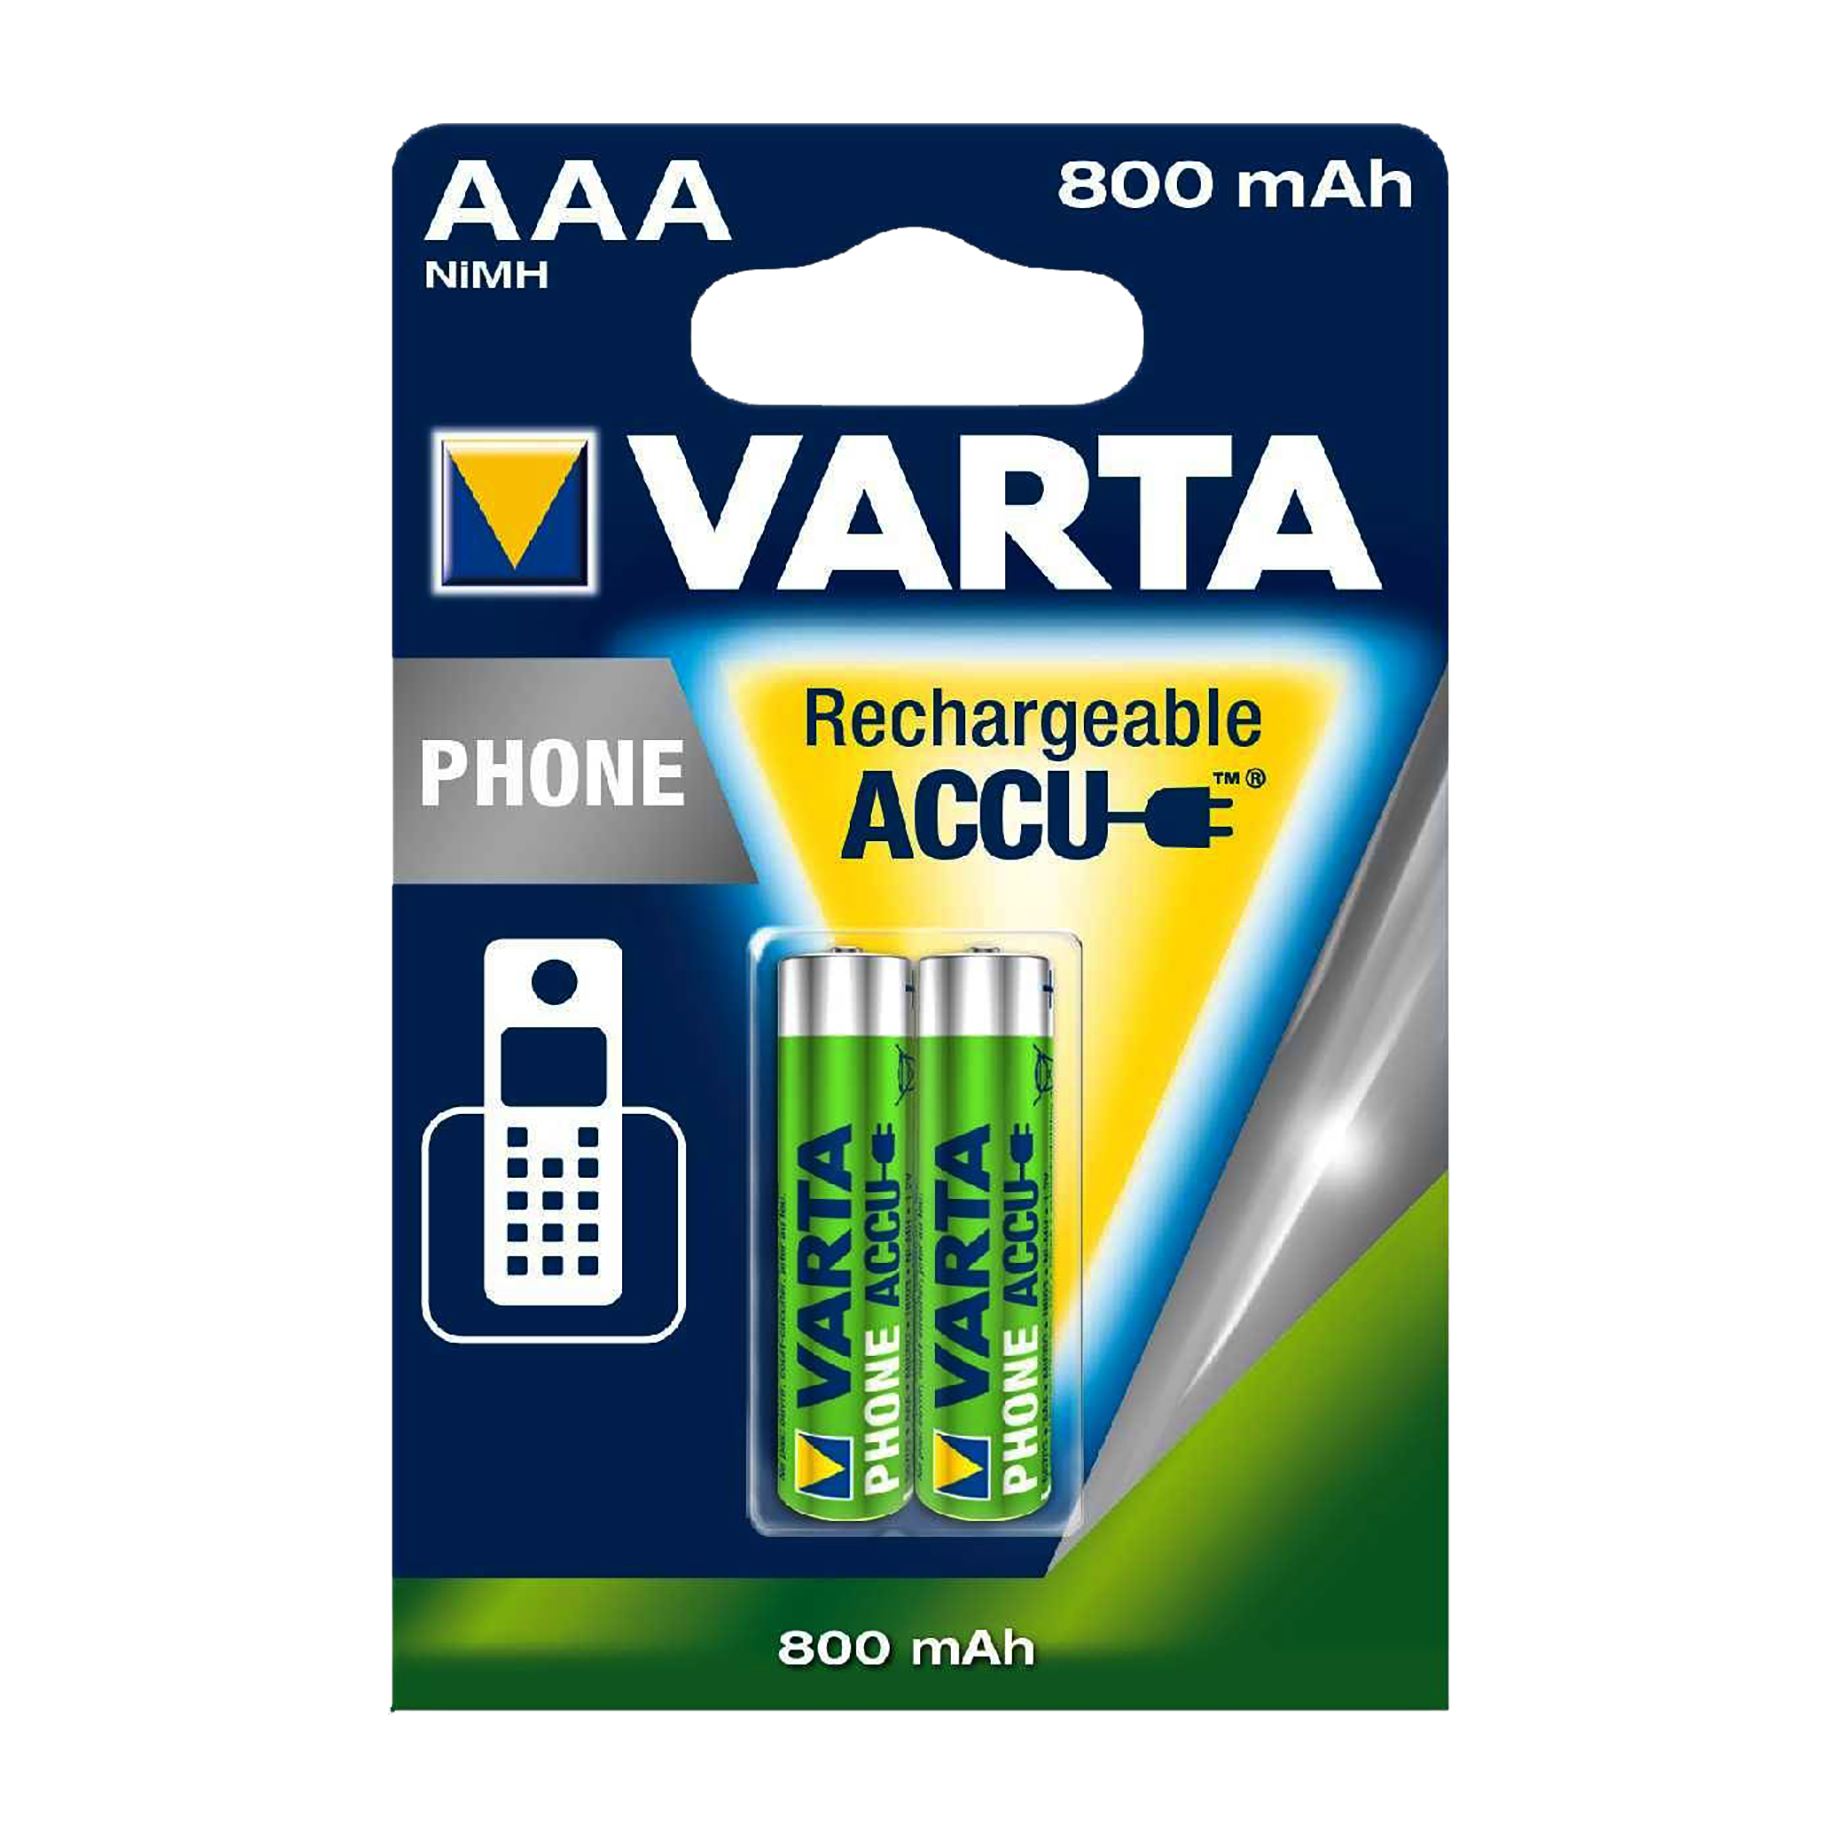 Rechargeable Energy Accu